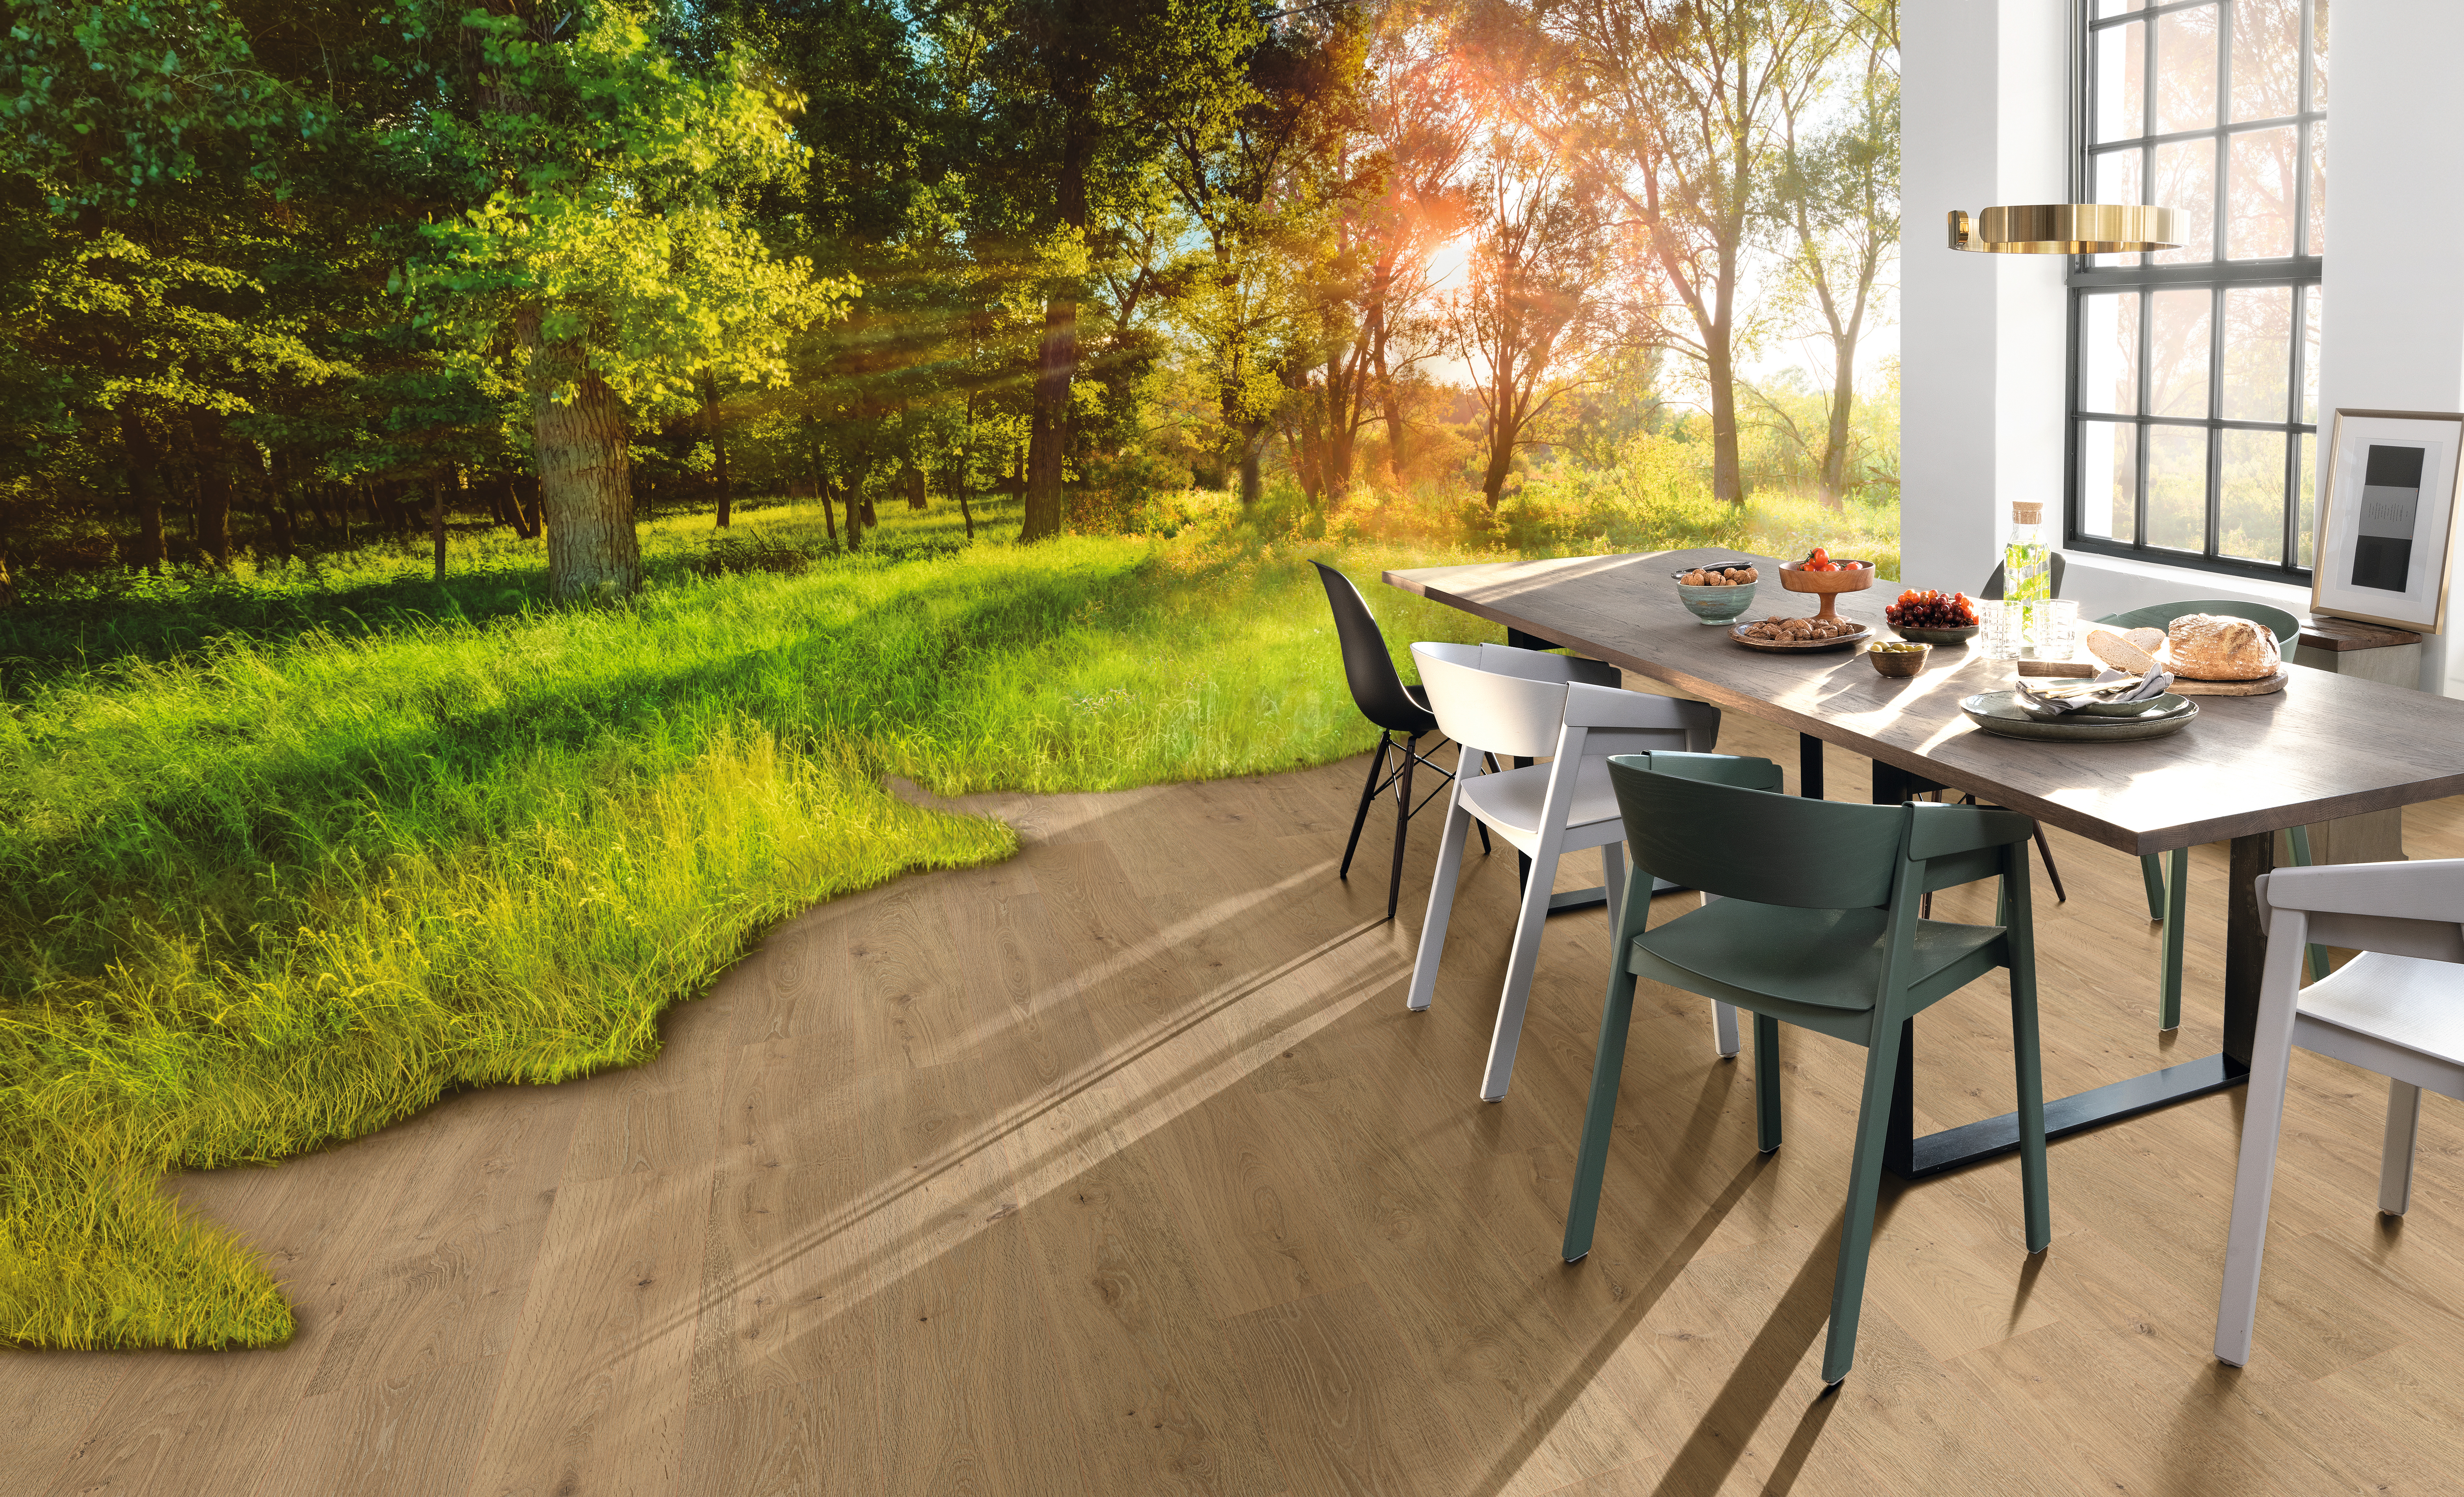 Comfort Flooring with cork: When nature moves in